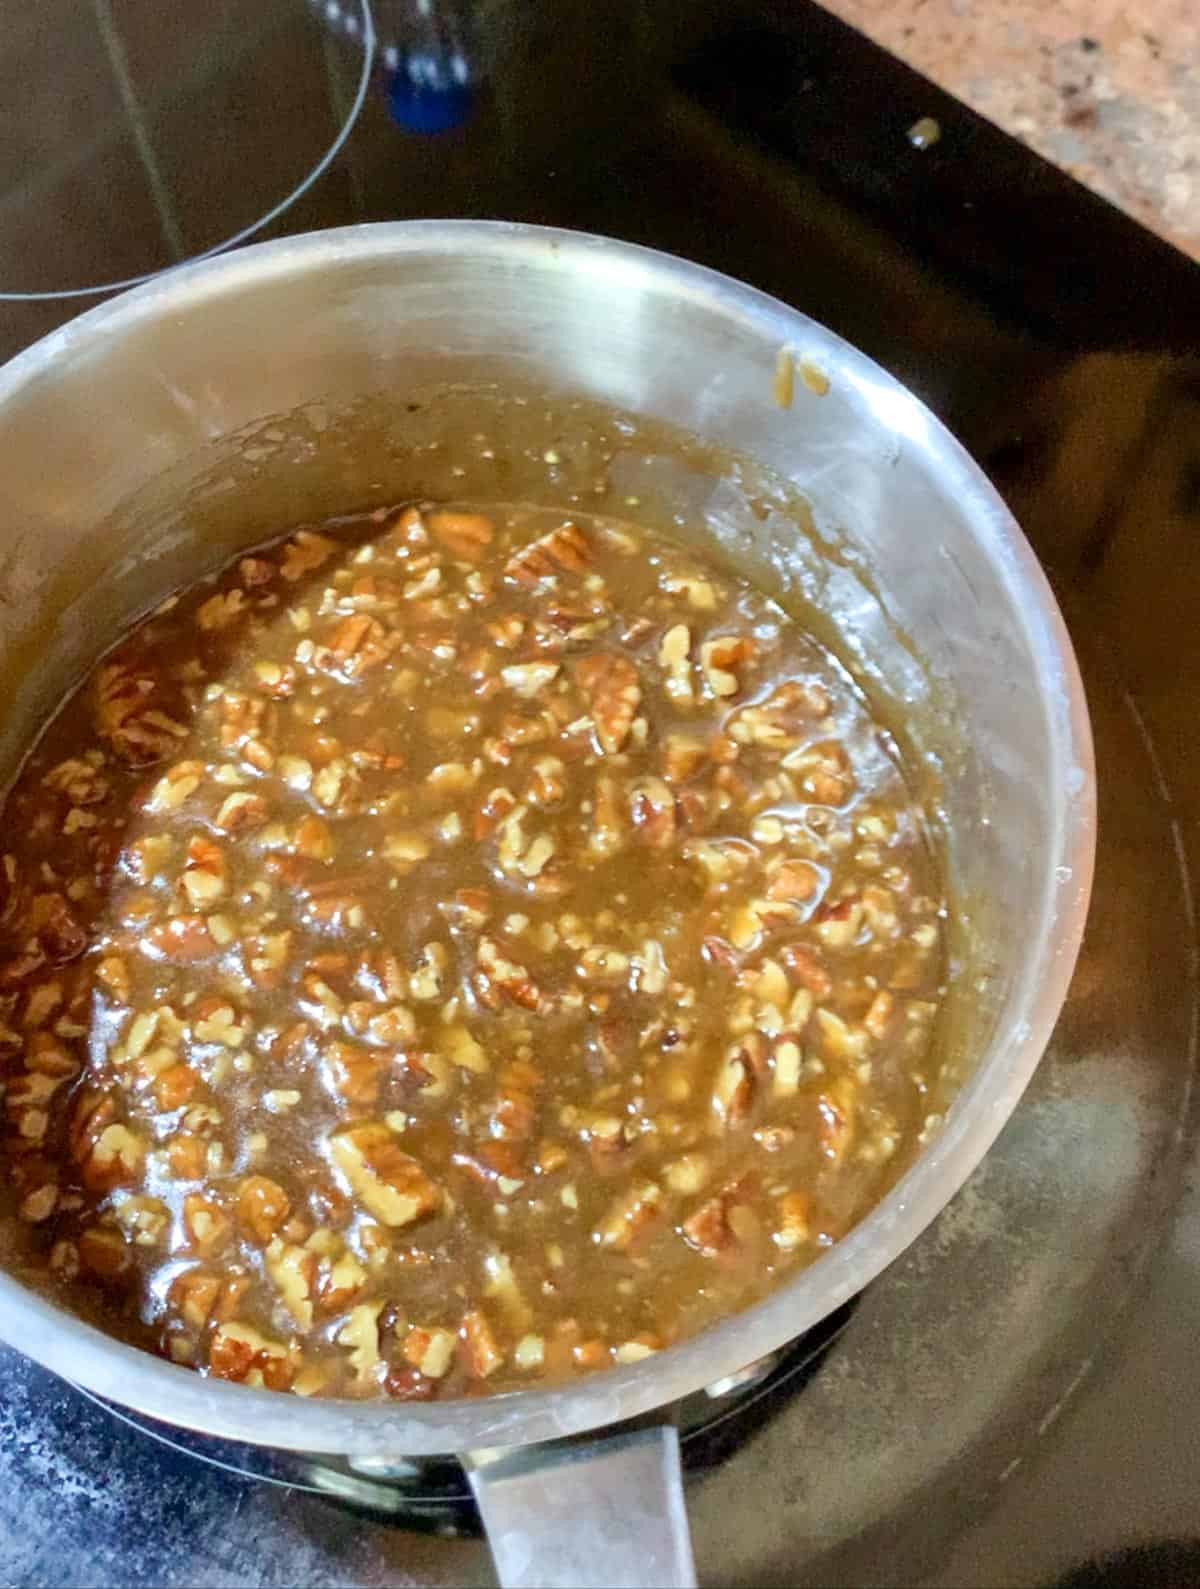 pecan sauce in a the saucepan on the stove for pecan cake.